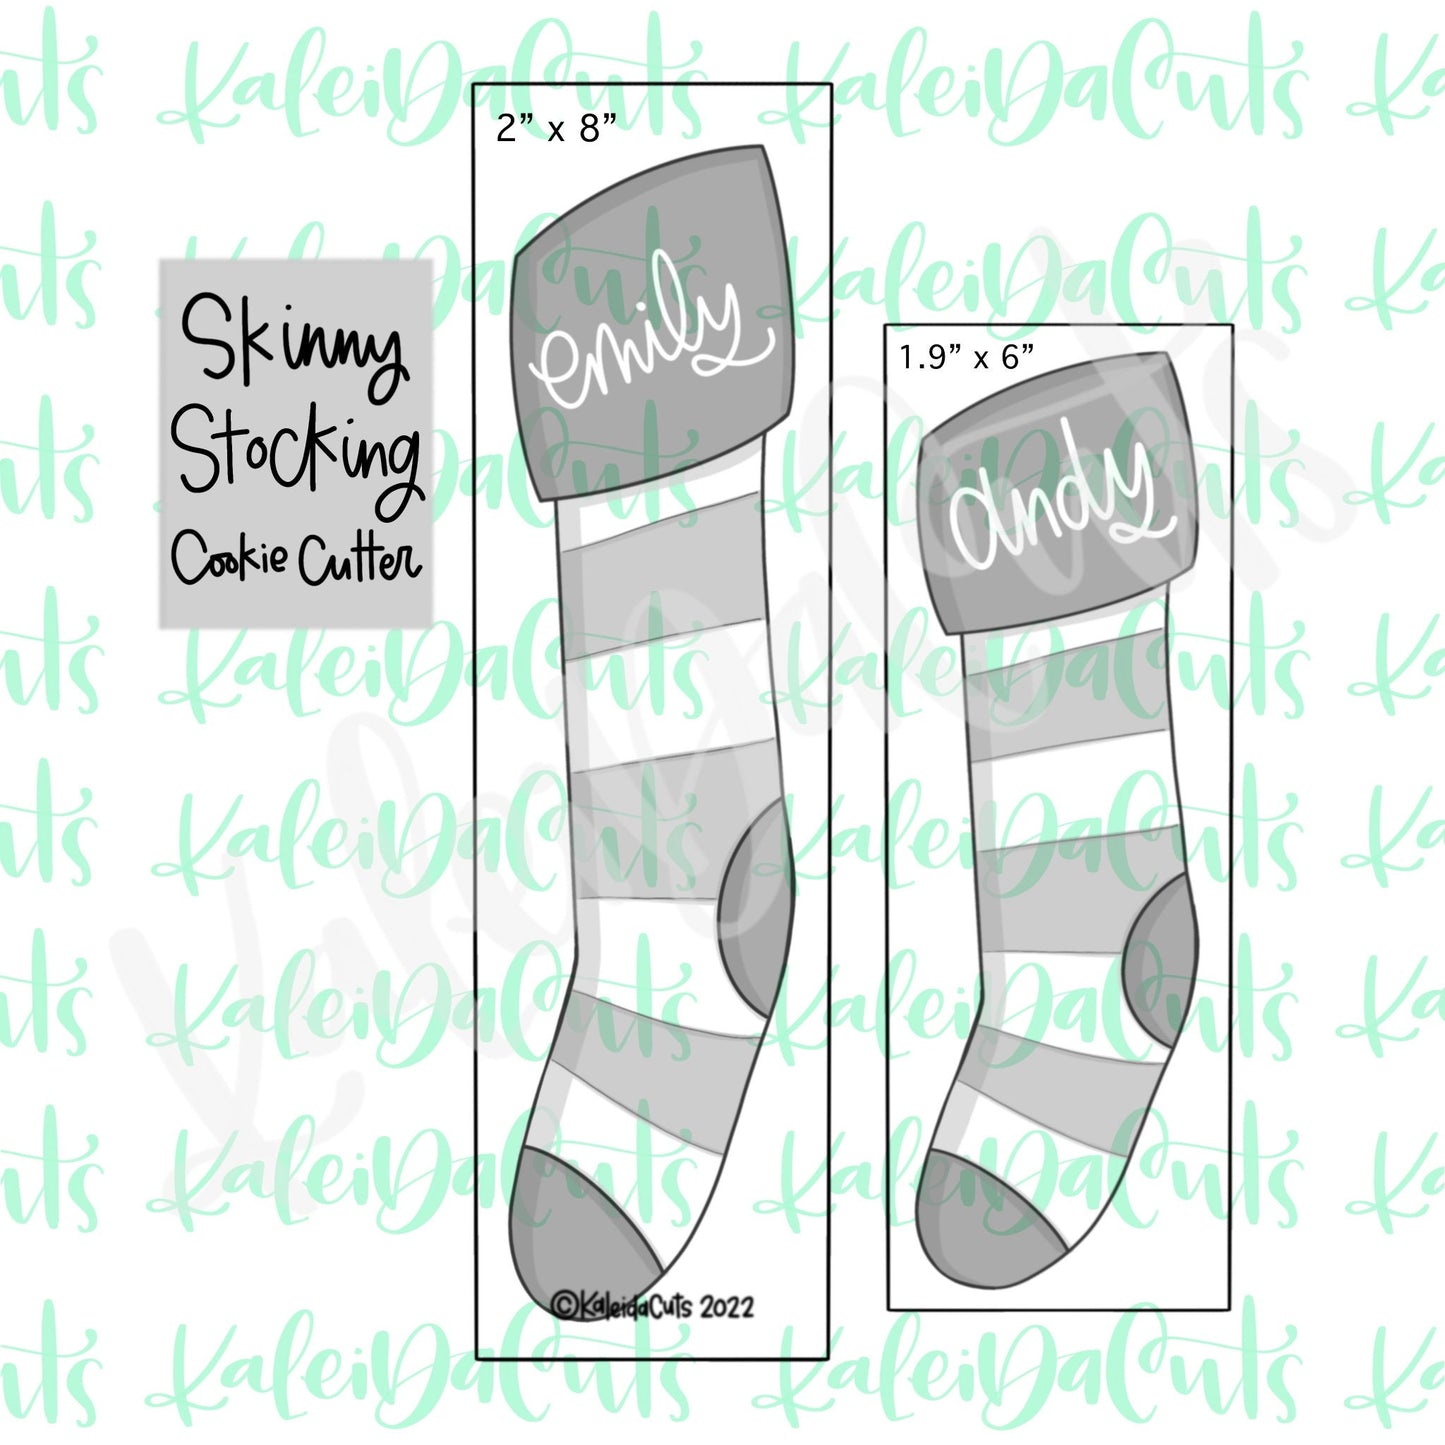 Skinny Stocking Cookie Cutter